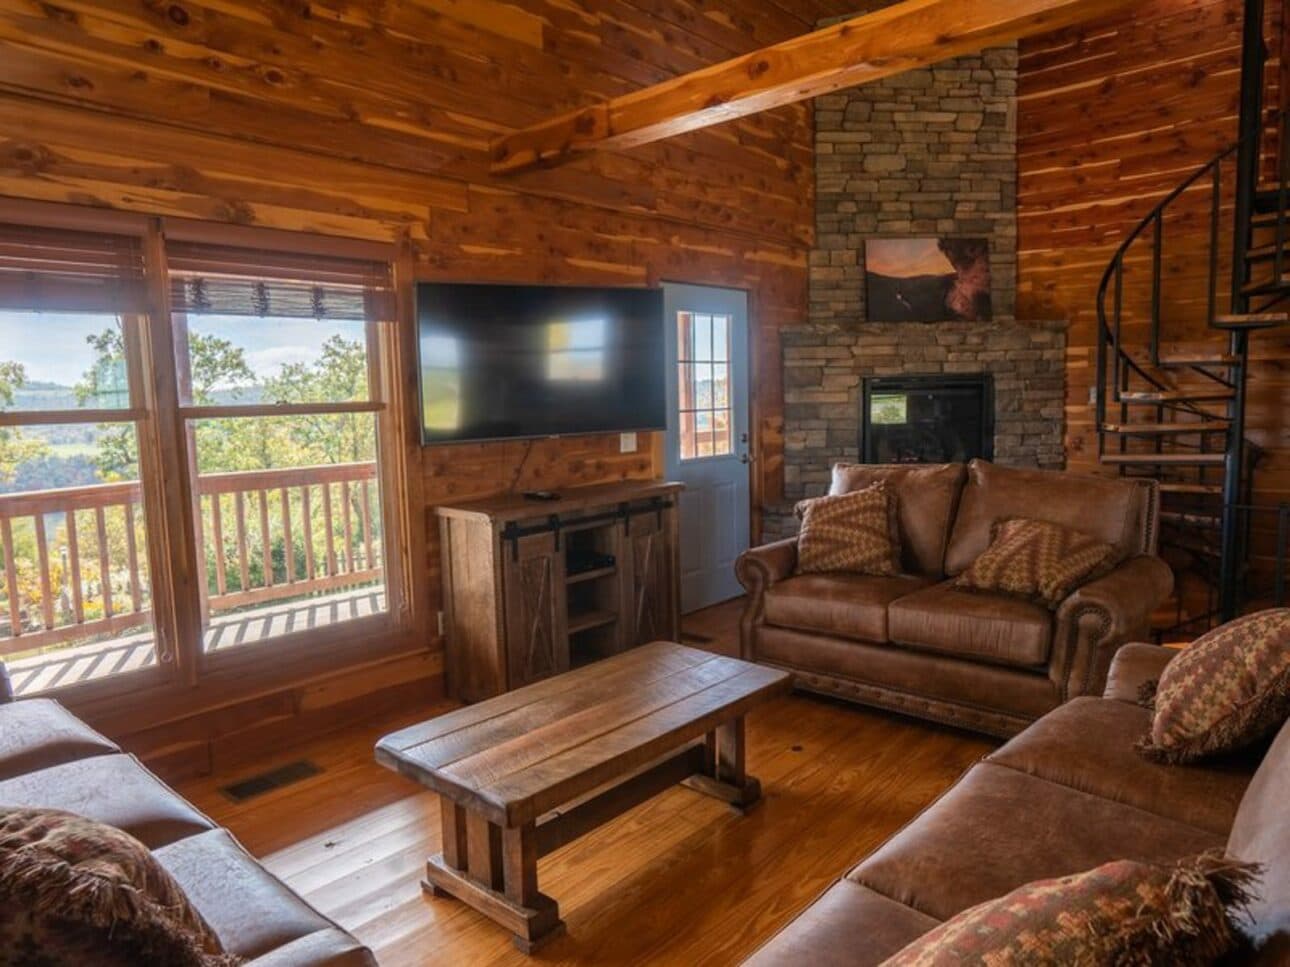 The beautiful living area of the Big Sky Cabin.